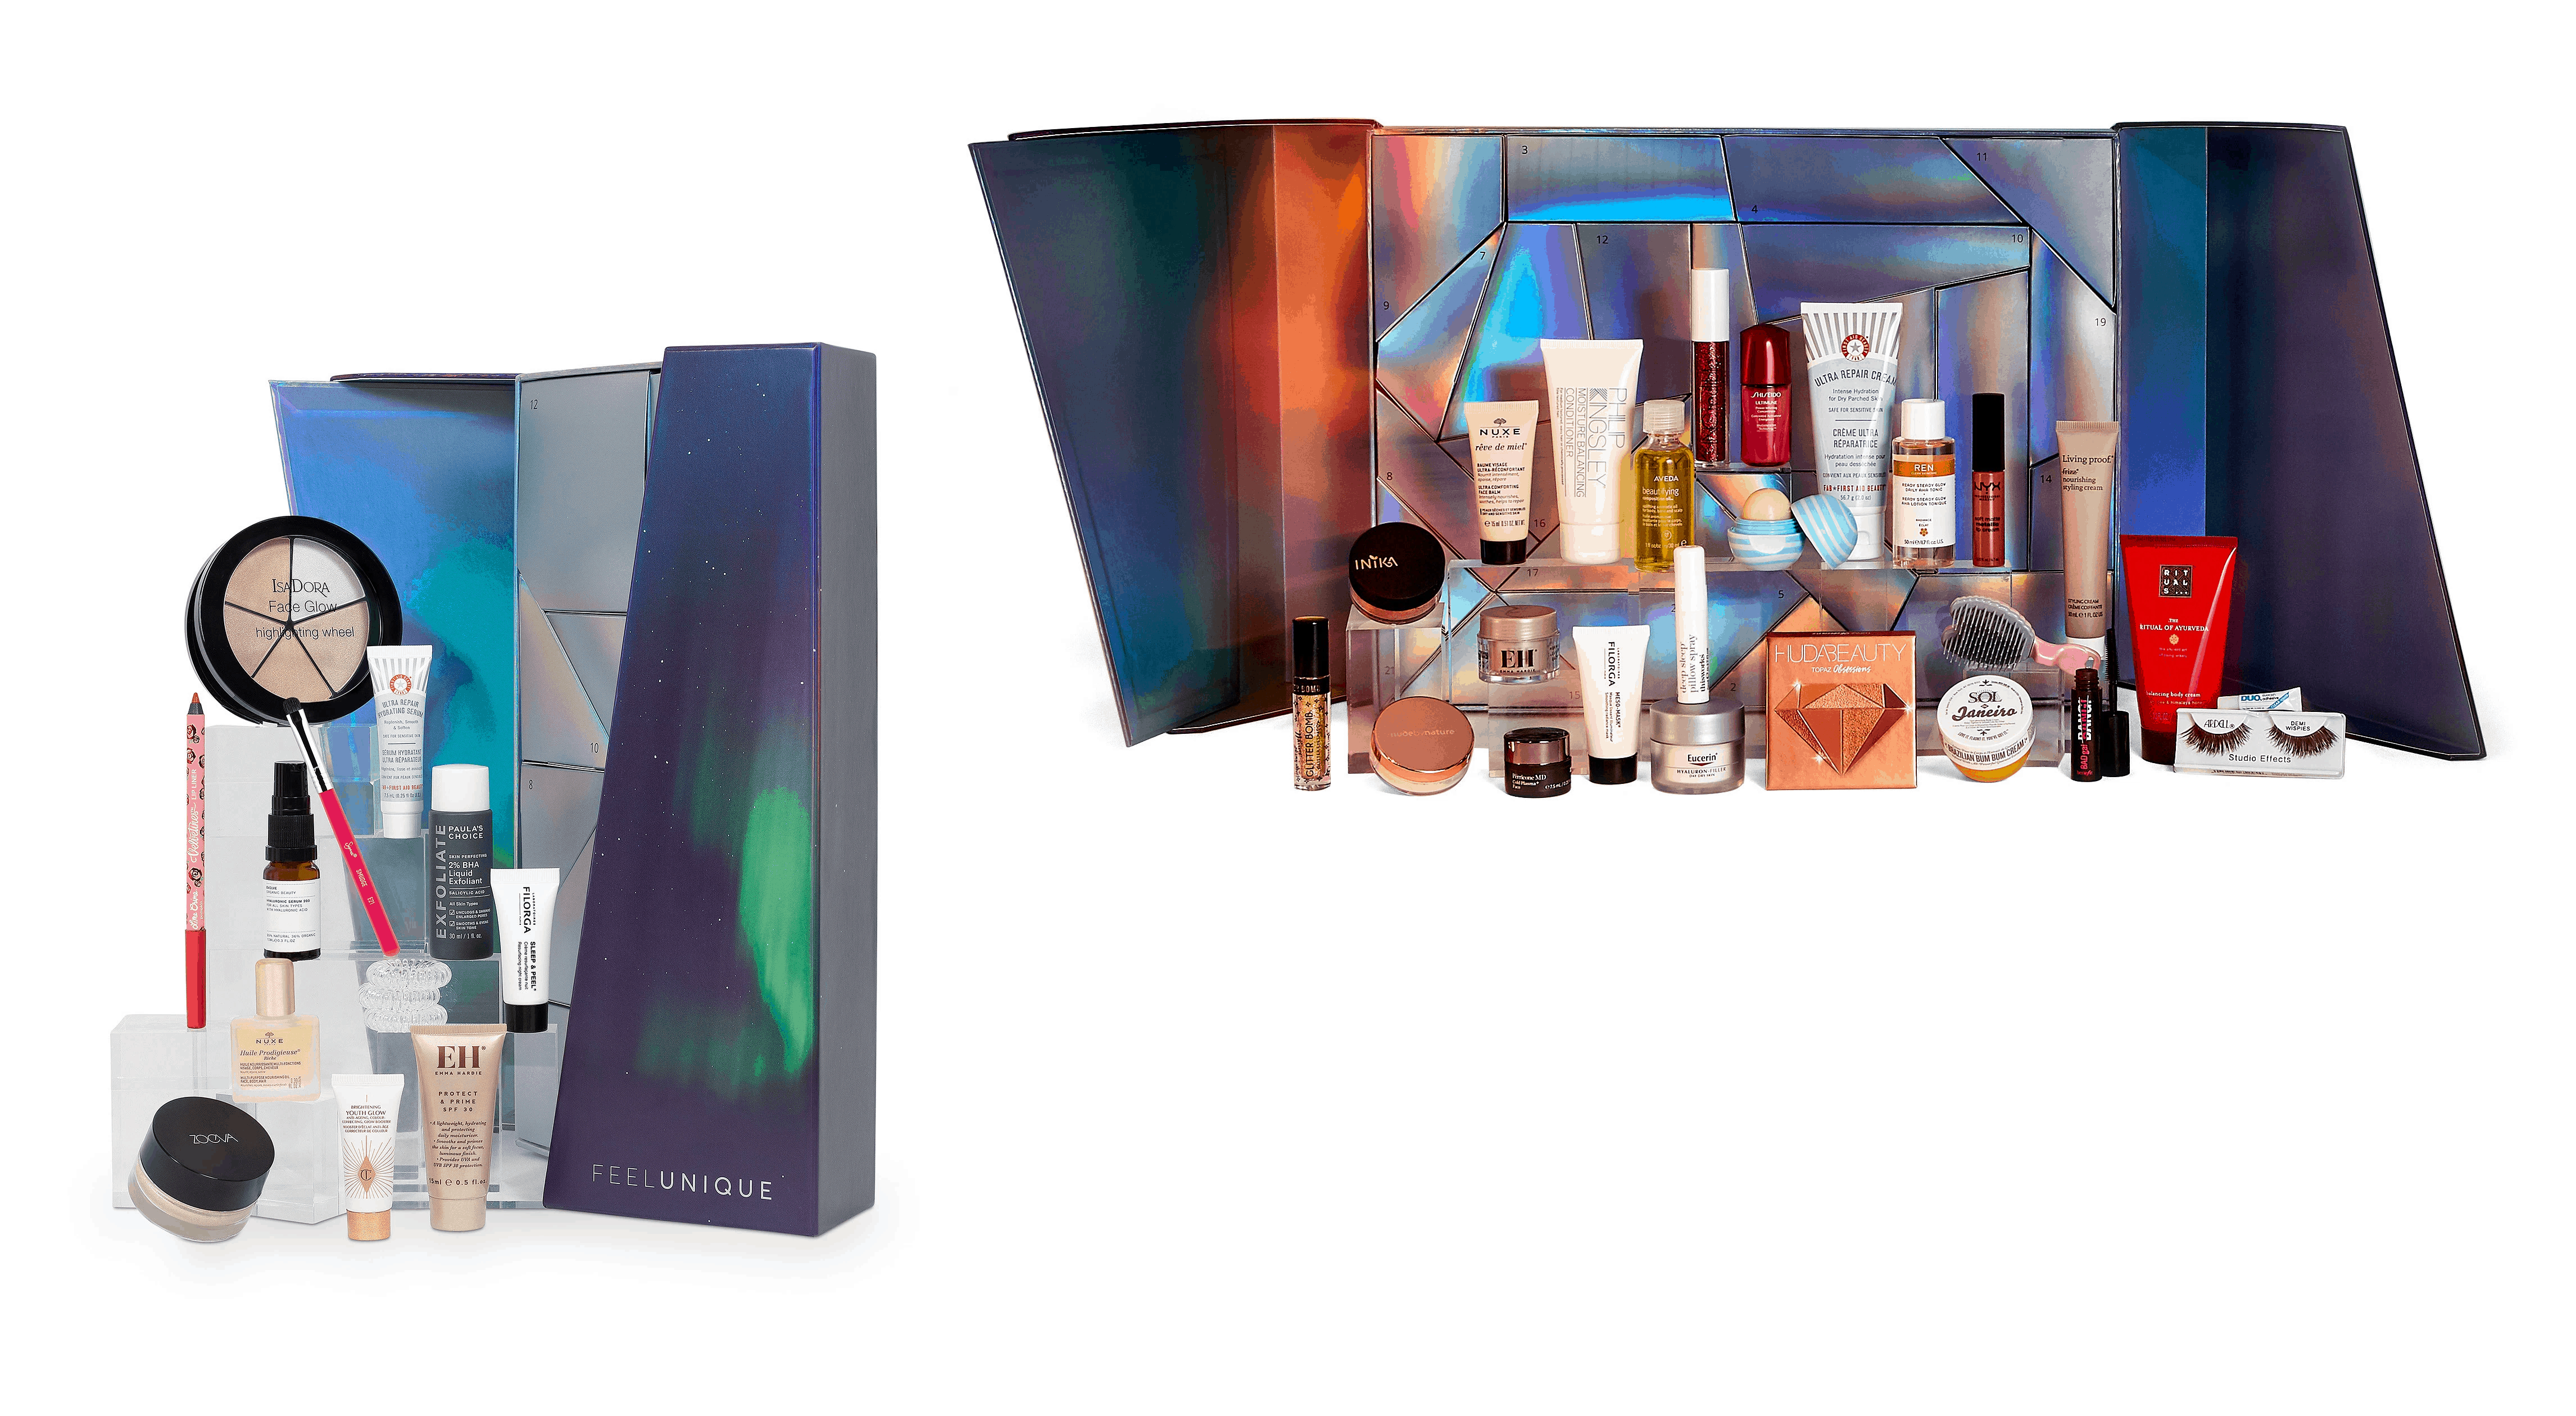 Feelunique Beauty Advent Calendar Reviews Get All The Details At Hello